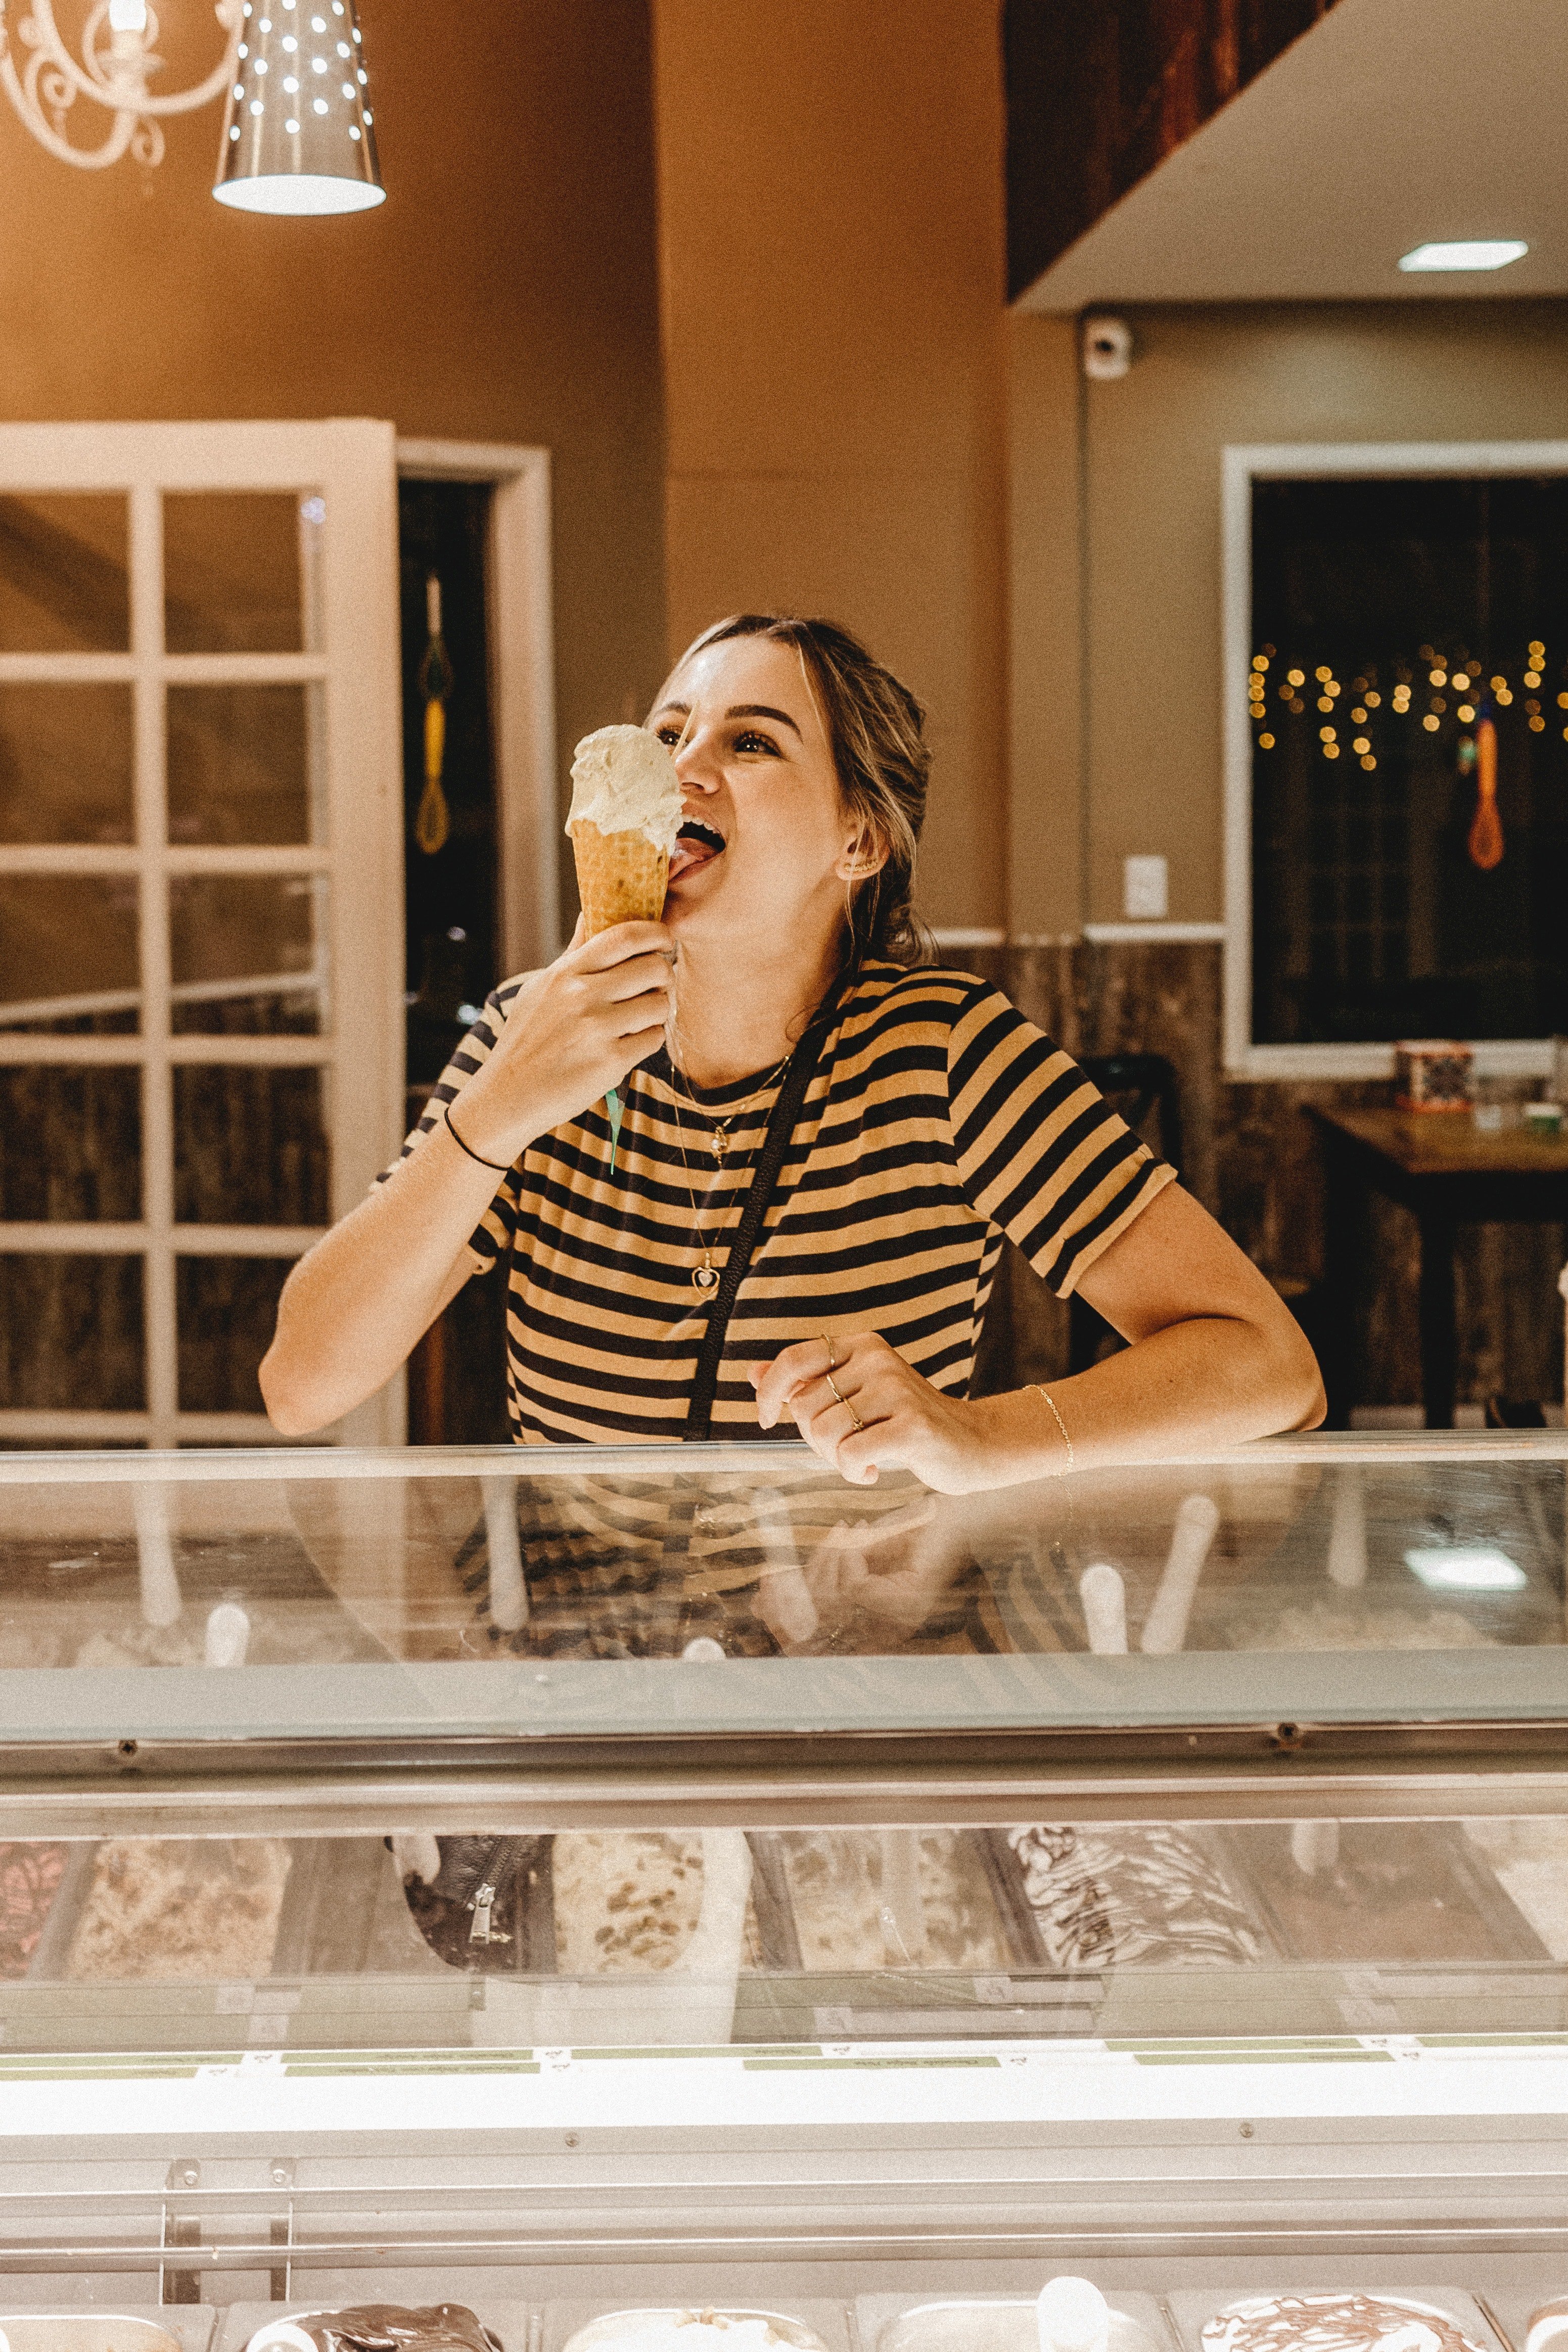 A woman eating ice cream. | Source: Pexels